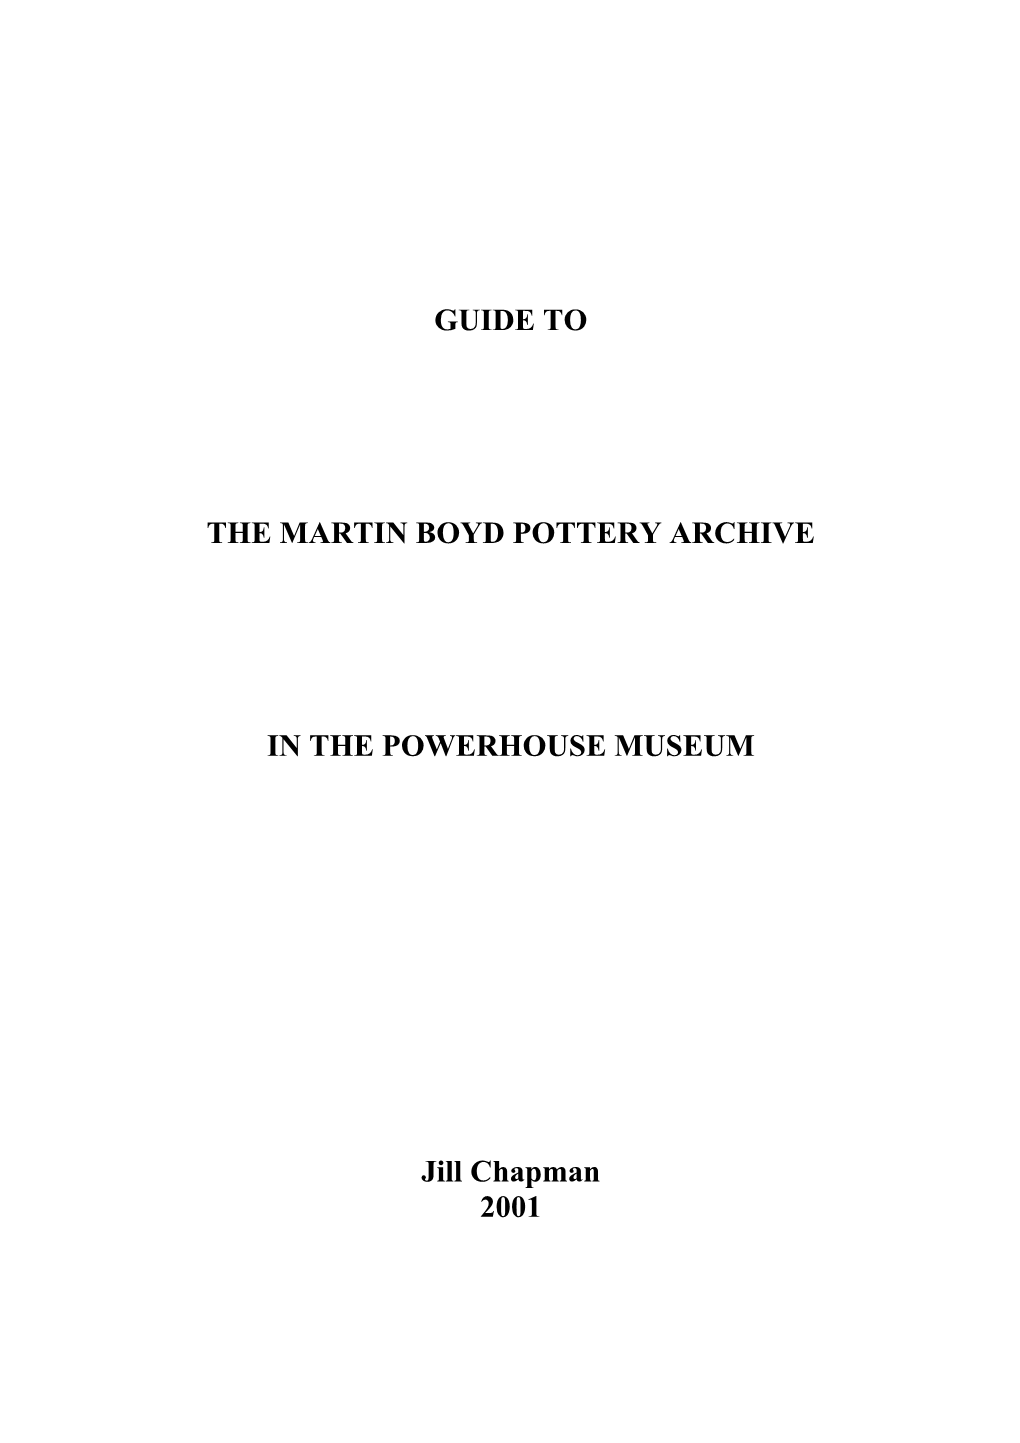 Guide to the Martin Boyd Pottery Archive in The